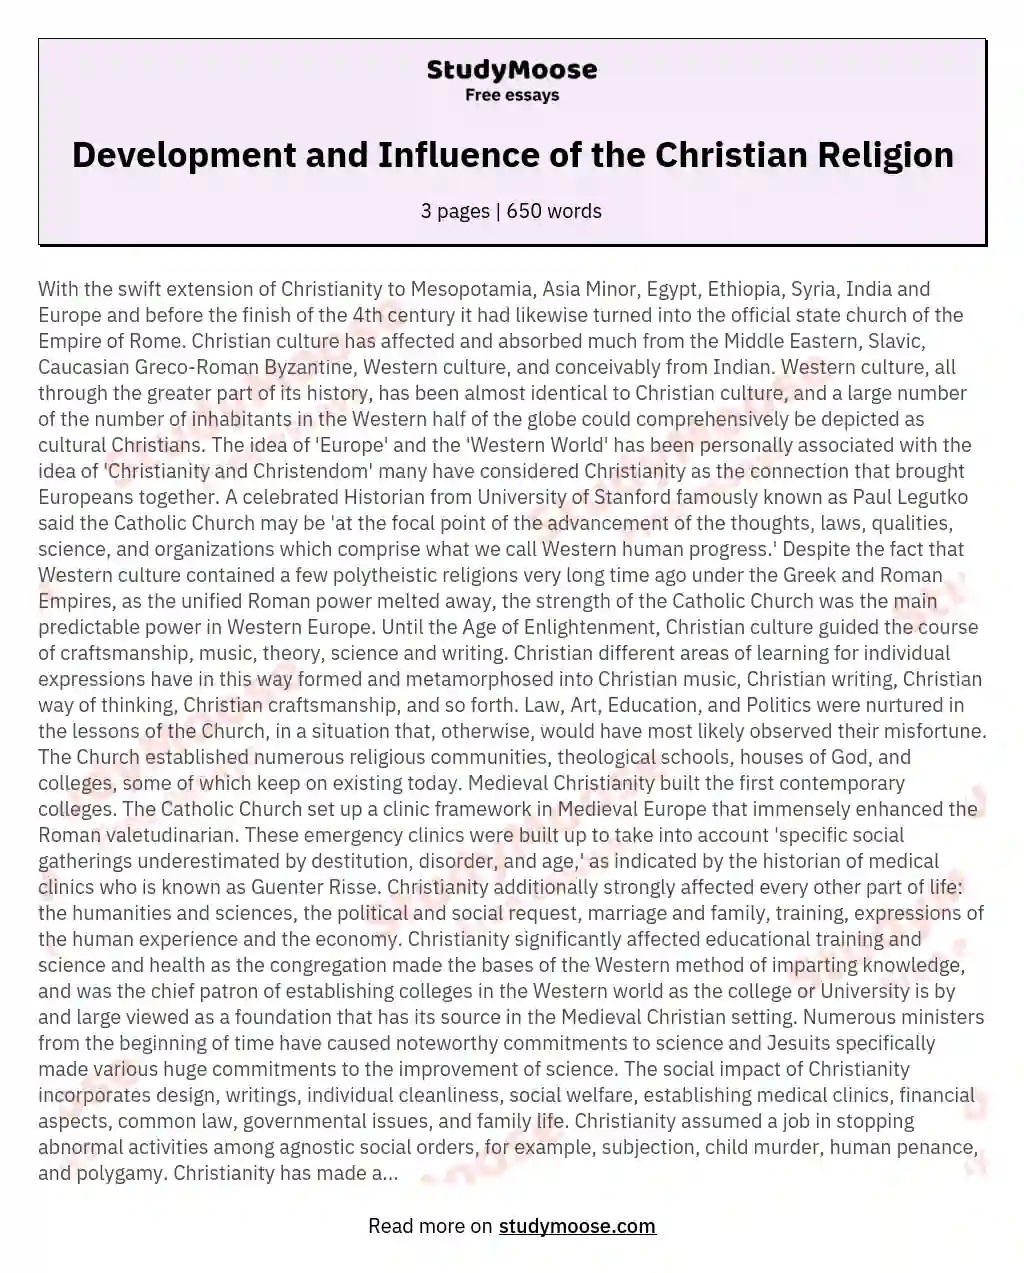 Development and Influence of the Christian Religion essay